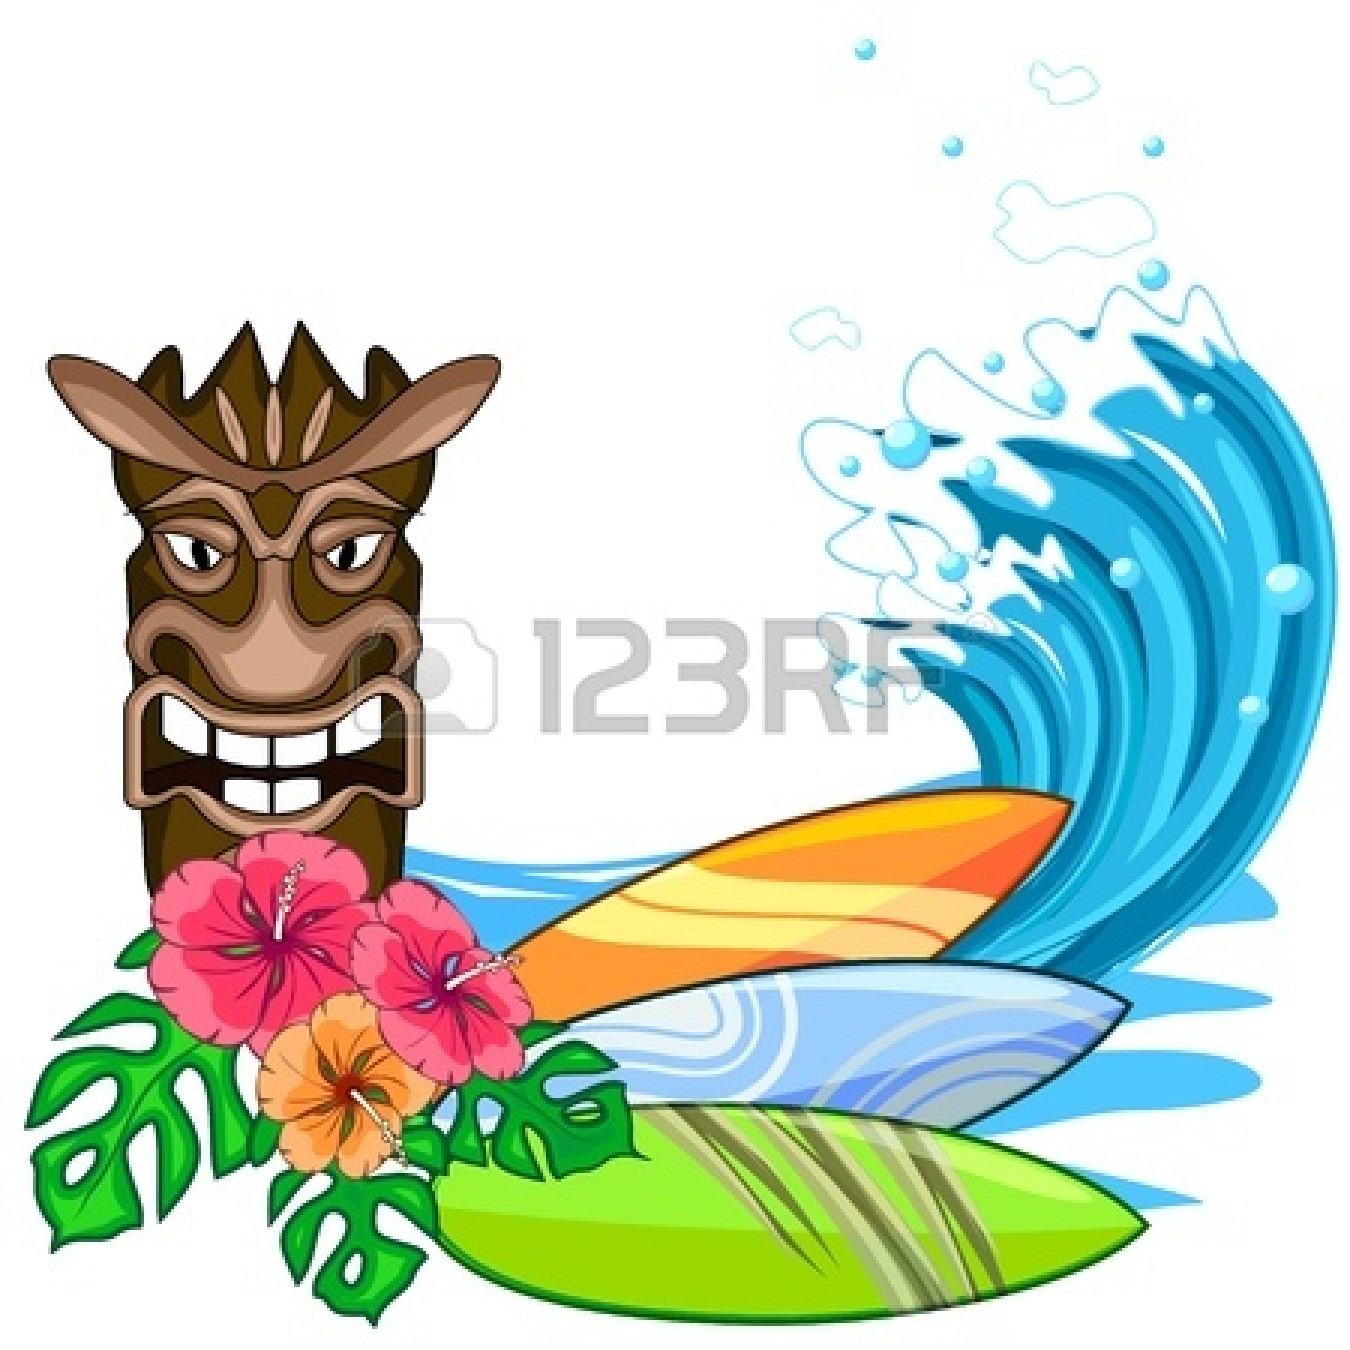 There Is 54 Luau Party Free Cliparts All Used For Free